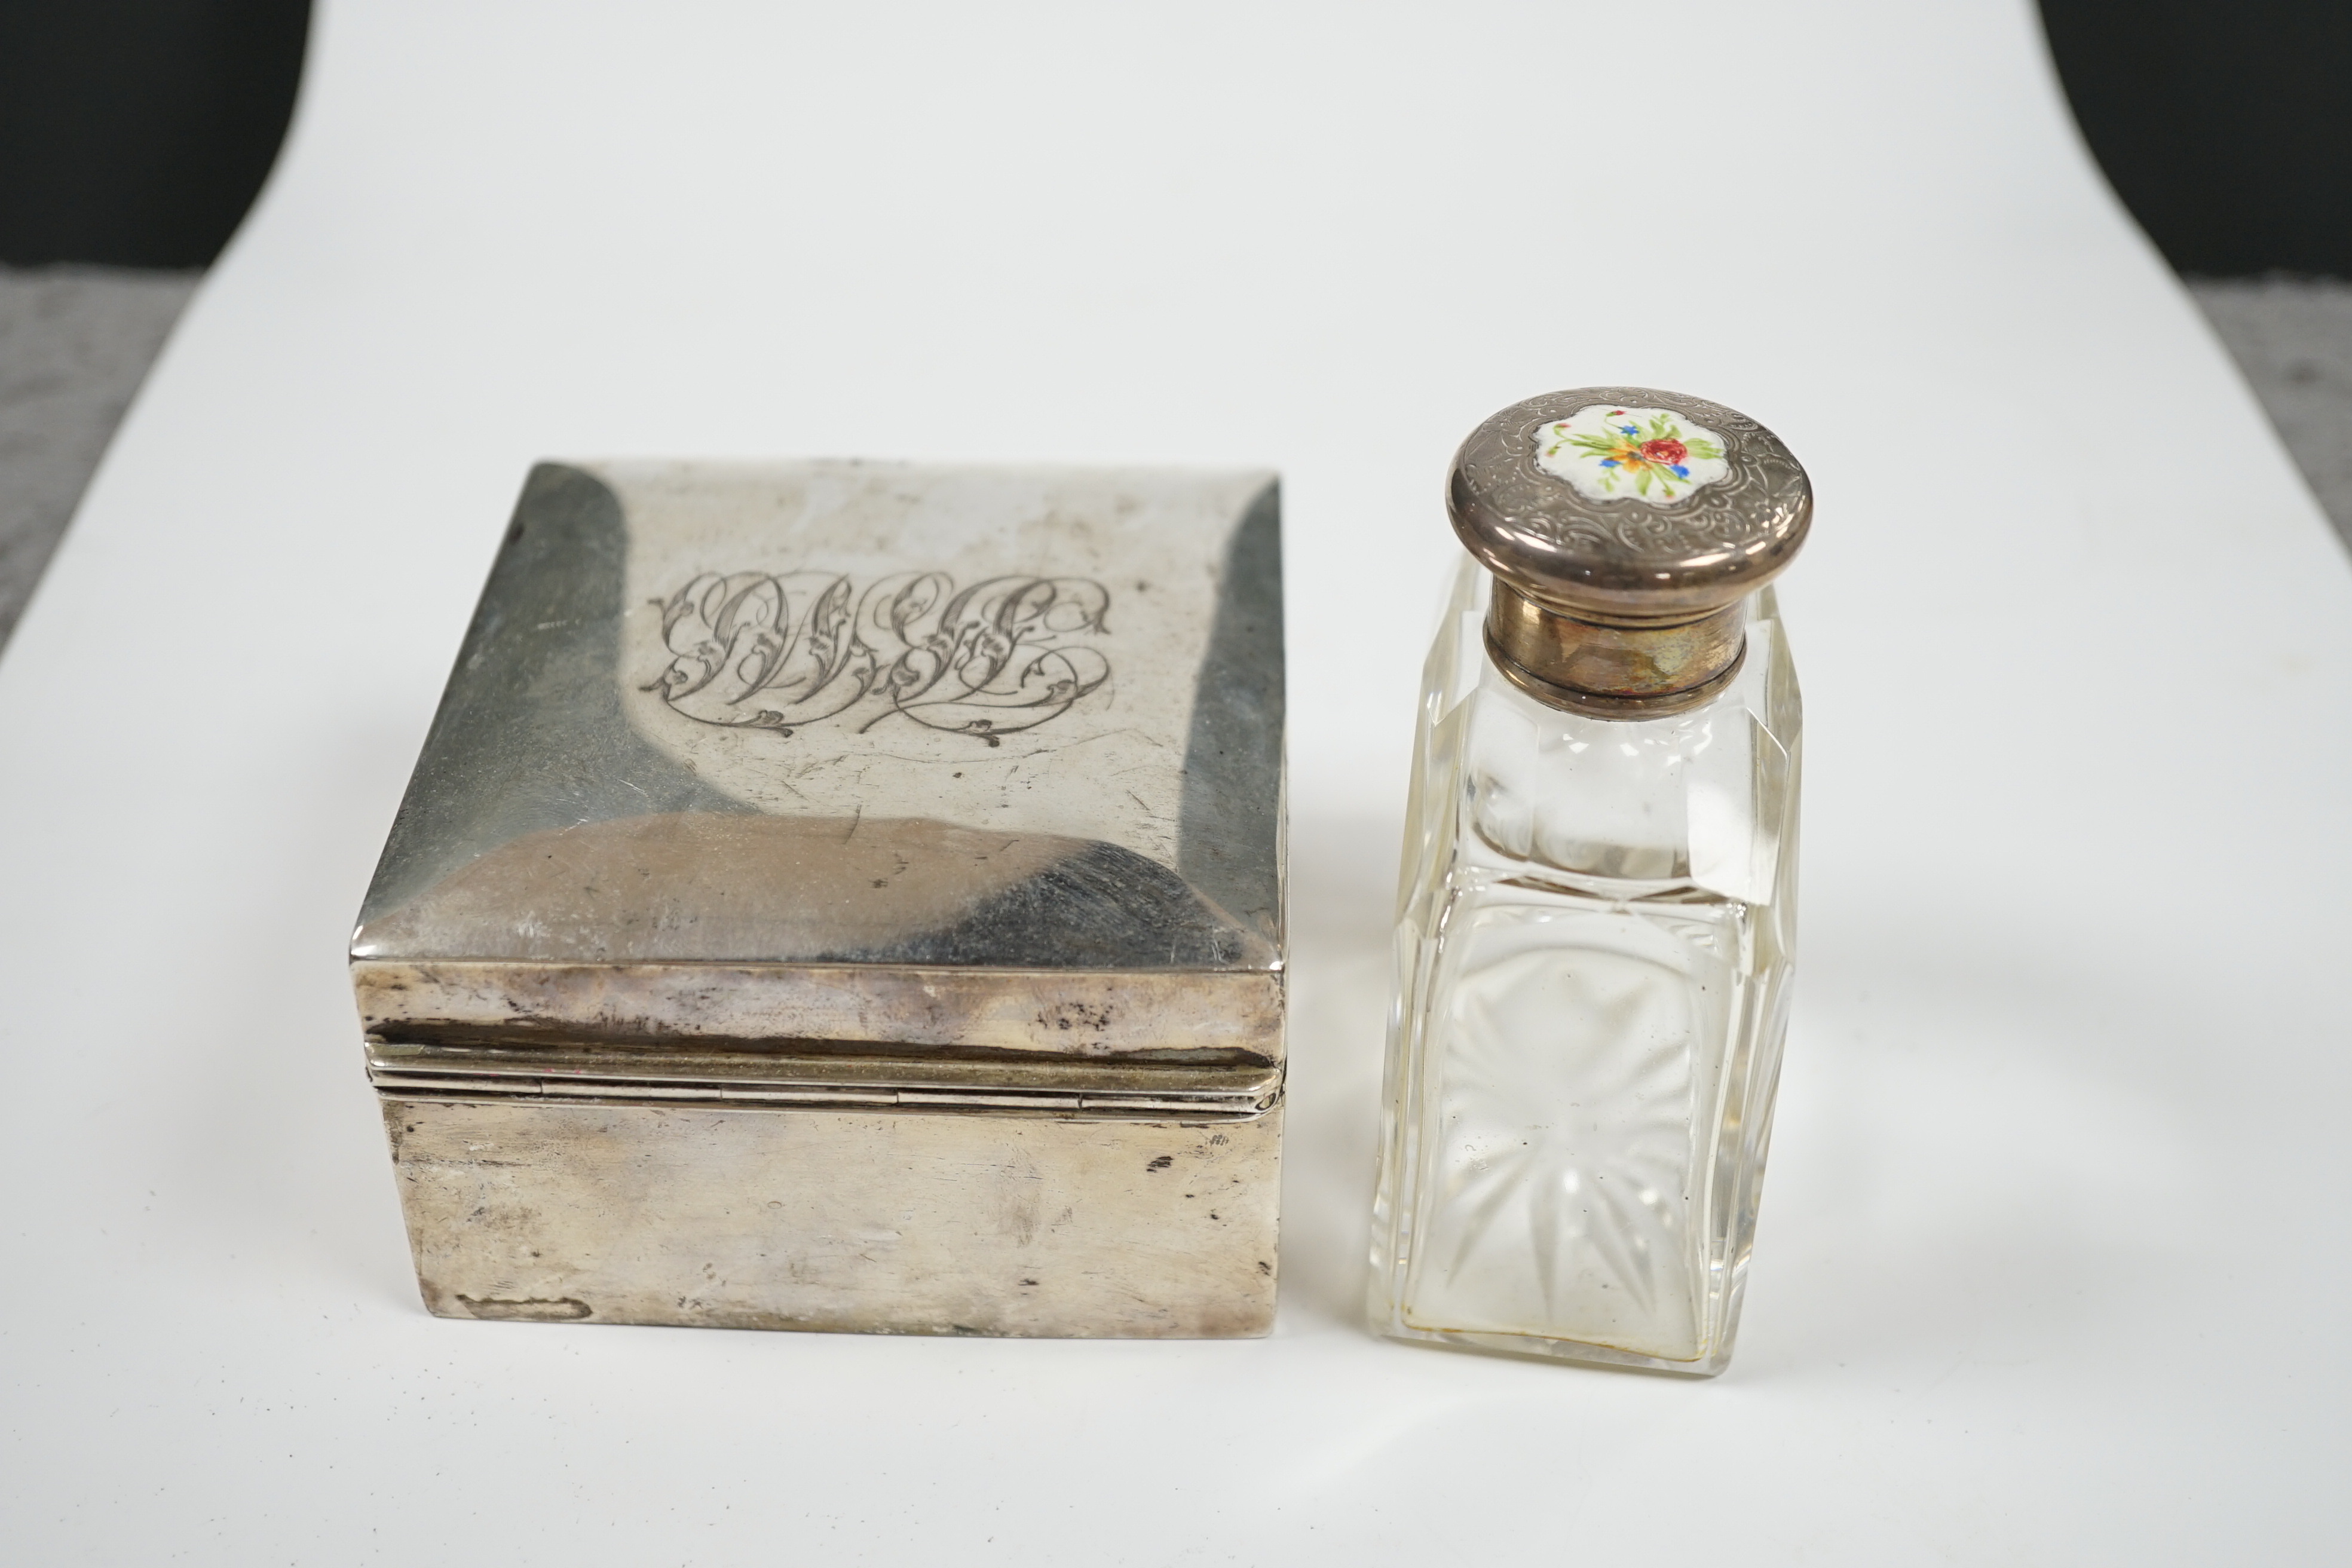 An Edwardian silver mounted cigarette box, marks rubbed, 90mm, together with a white metal and enamel topped glass scent bottle. Condition - poor